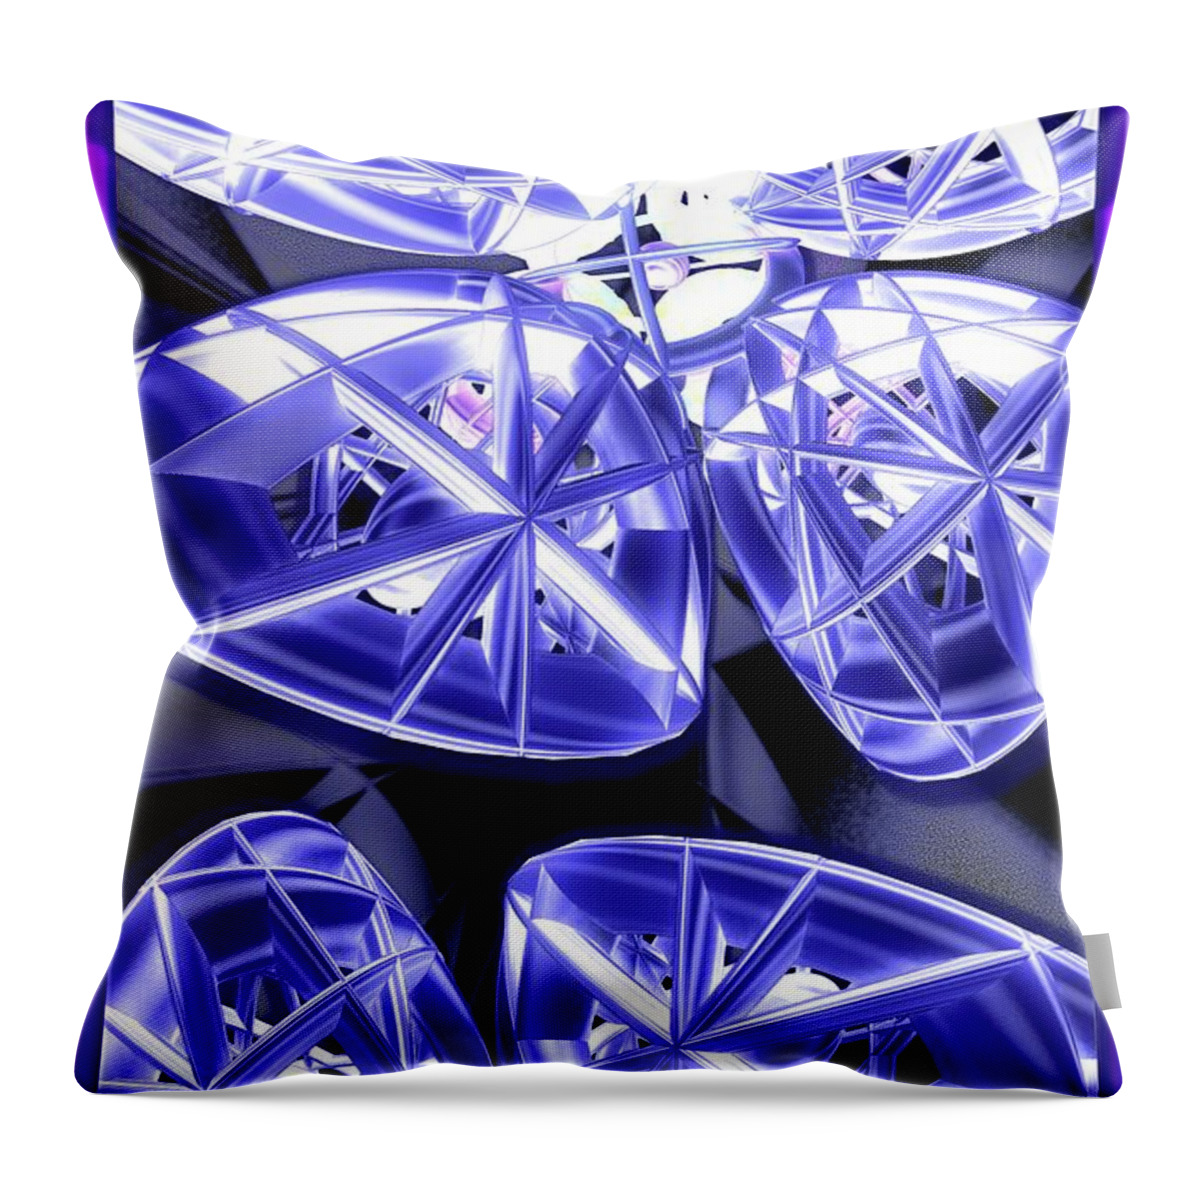 Gyroscope Throw Pillow featuring the digital art Gyroscopic by Ronald Bissett